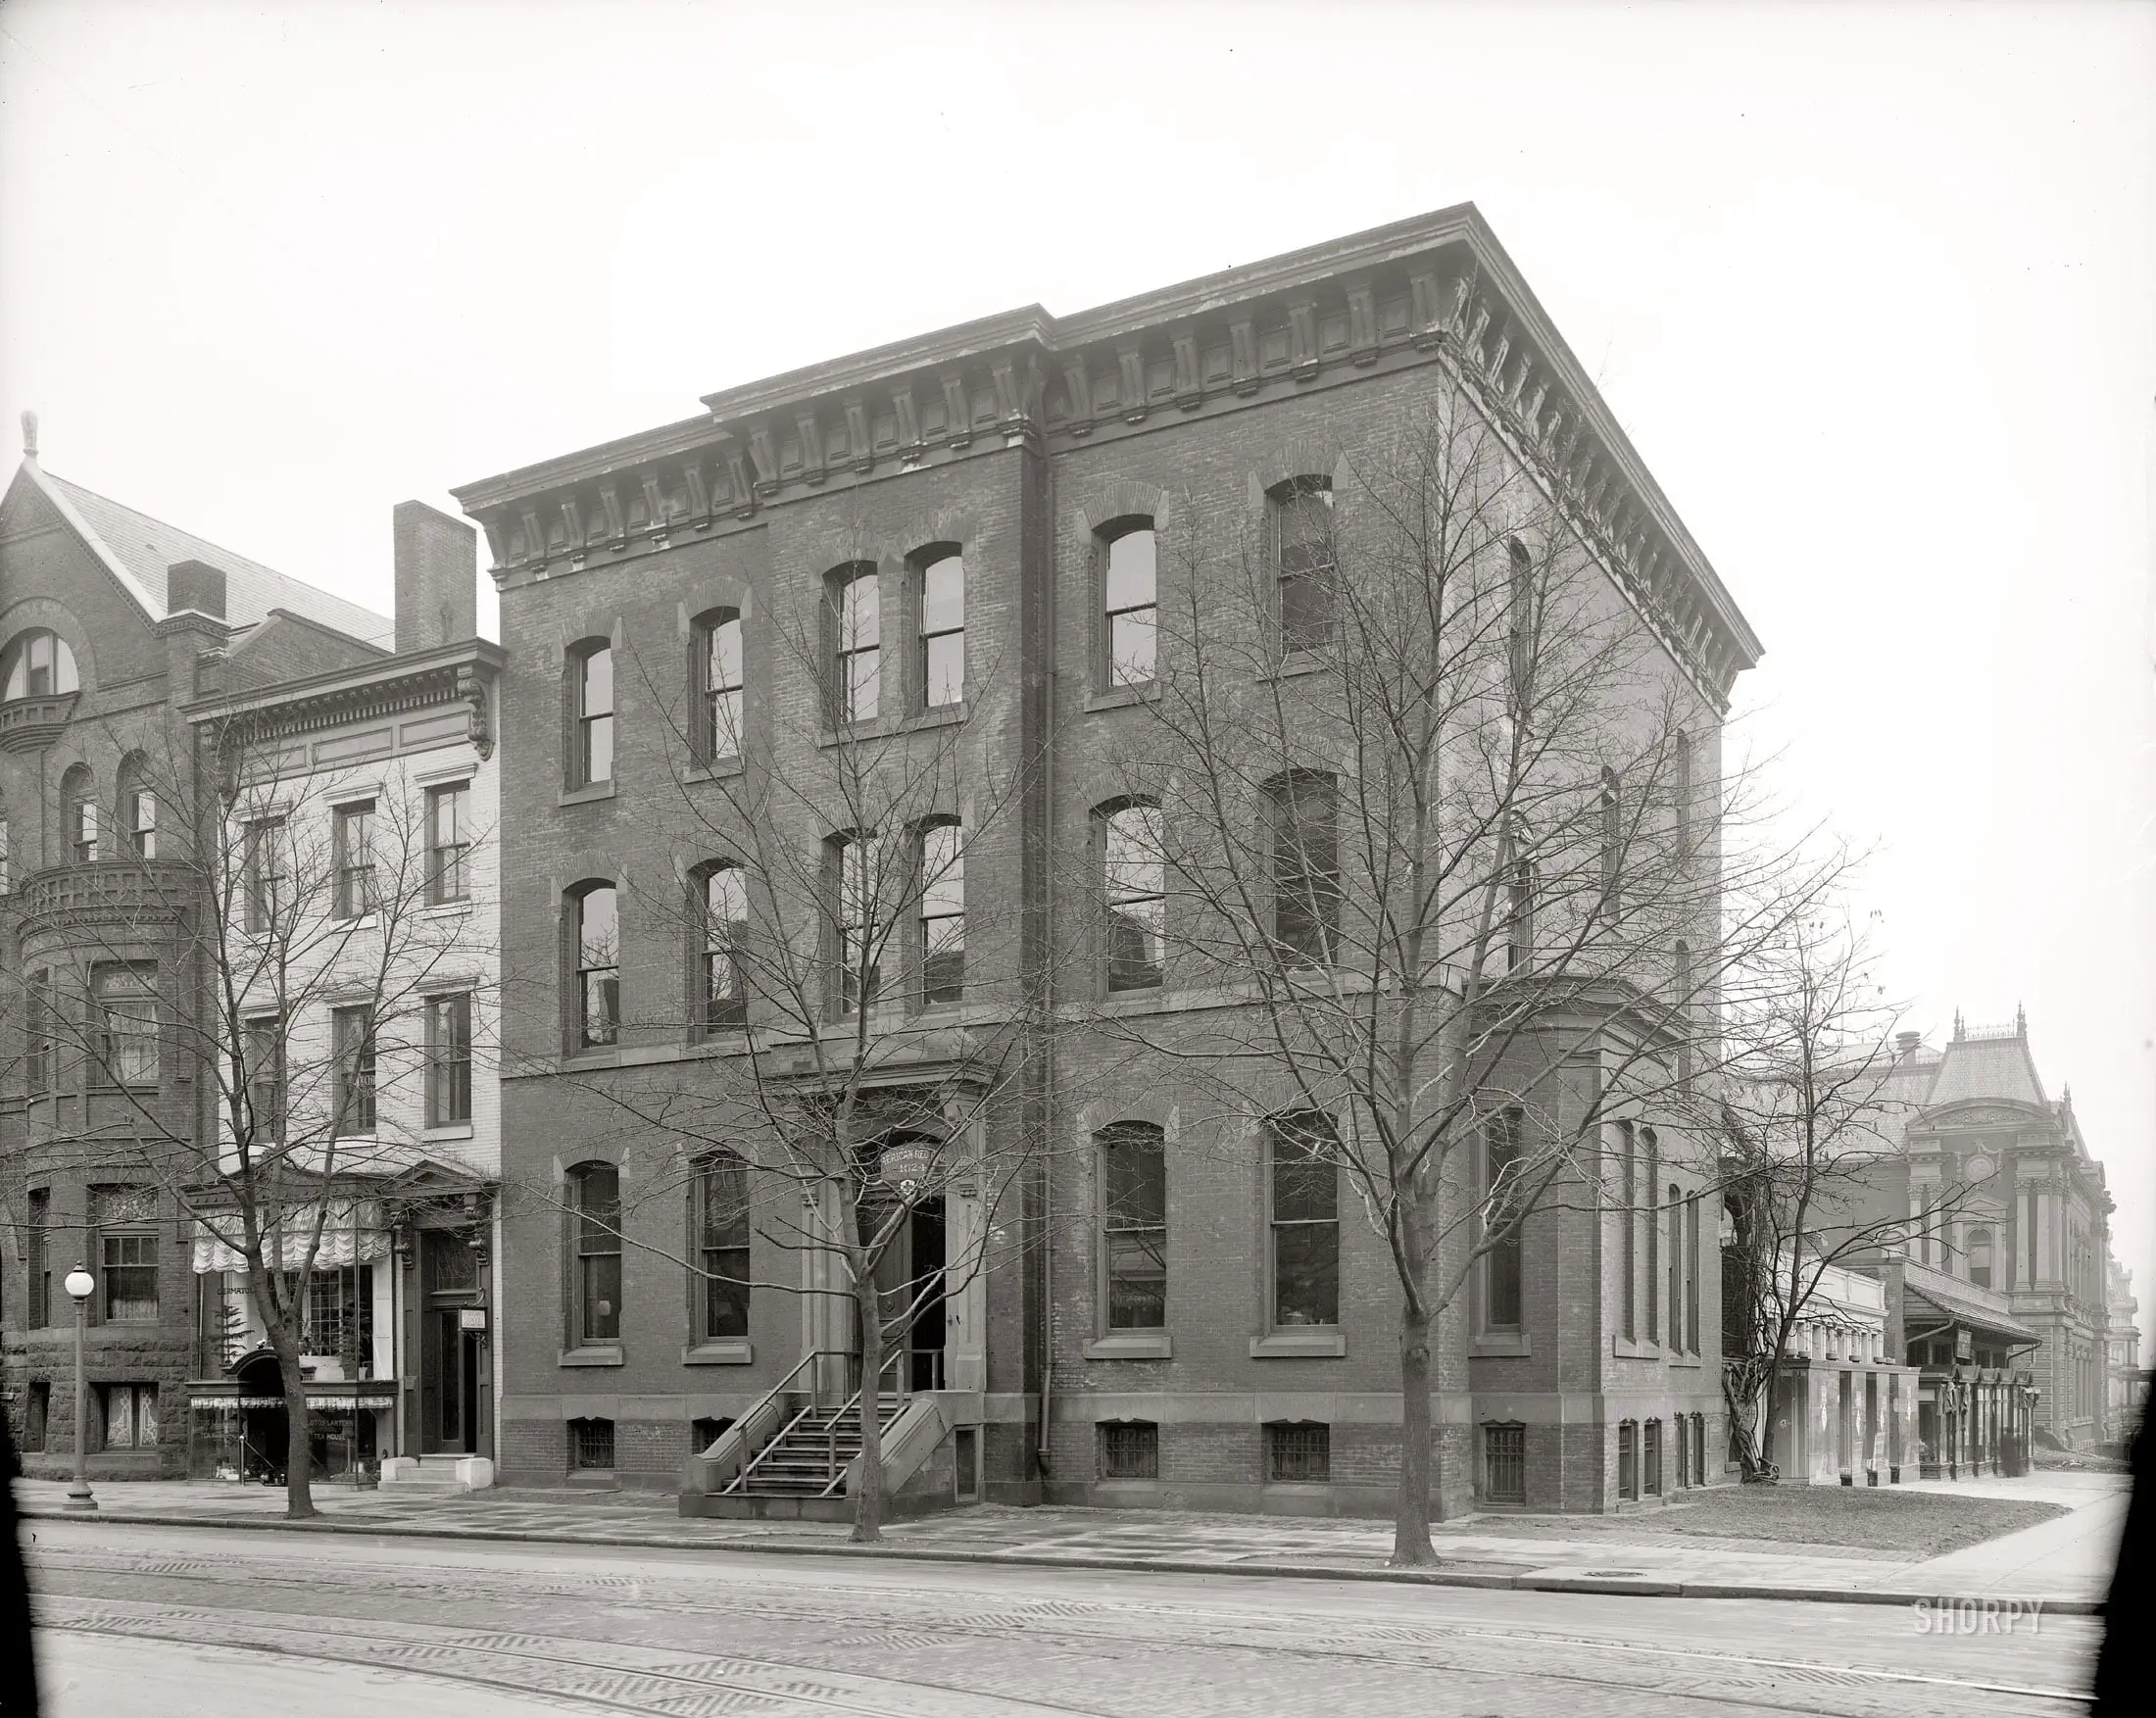  Washington, D.C., circa 1916. An uncaptioned street scene showing a Red Cross building, a "Dermatological Institute," a handicraft school and the Lotos Lantern Tea House. Harris & Ewing Collection glass negative. 